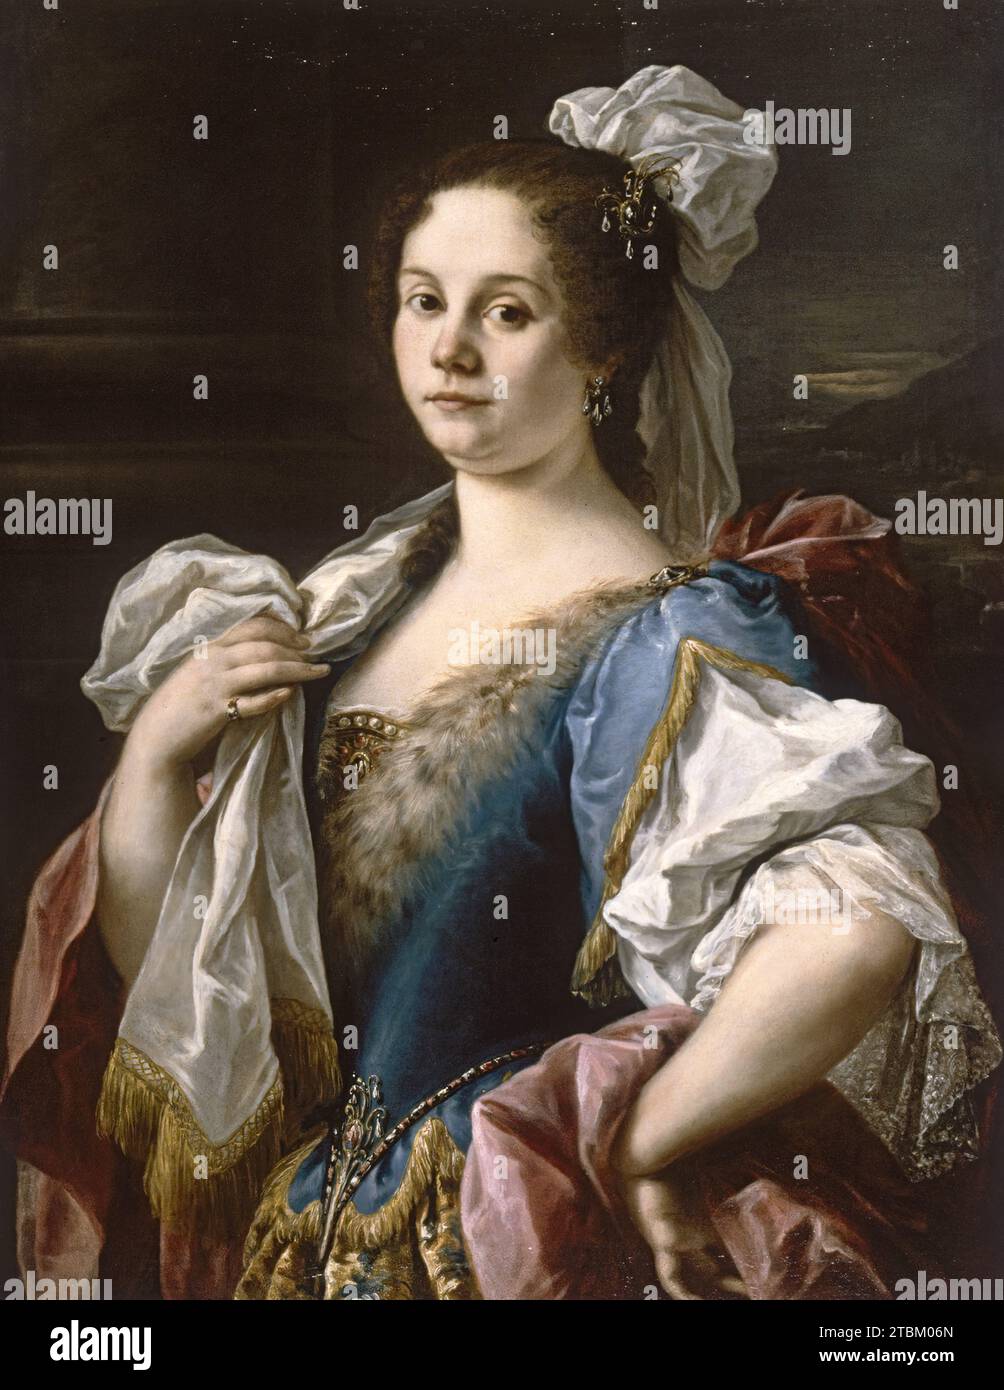 Portrait of a Noblewoman, c1750. Turning her gaze towards the spectator with one hand resting on her hip, this noblewoman has a stately, matronly appearance that is intended to express personal discipline and dignity. Her lavish costume - with a scarf tied to her hair, a brocade dress set with pearls and a feather, and jeweled pendants - communicates her social status, as does the column, suggestive of a palatial setting, a compositional device developed during the 16th century to communicate aristocratic status. Stock Photo